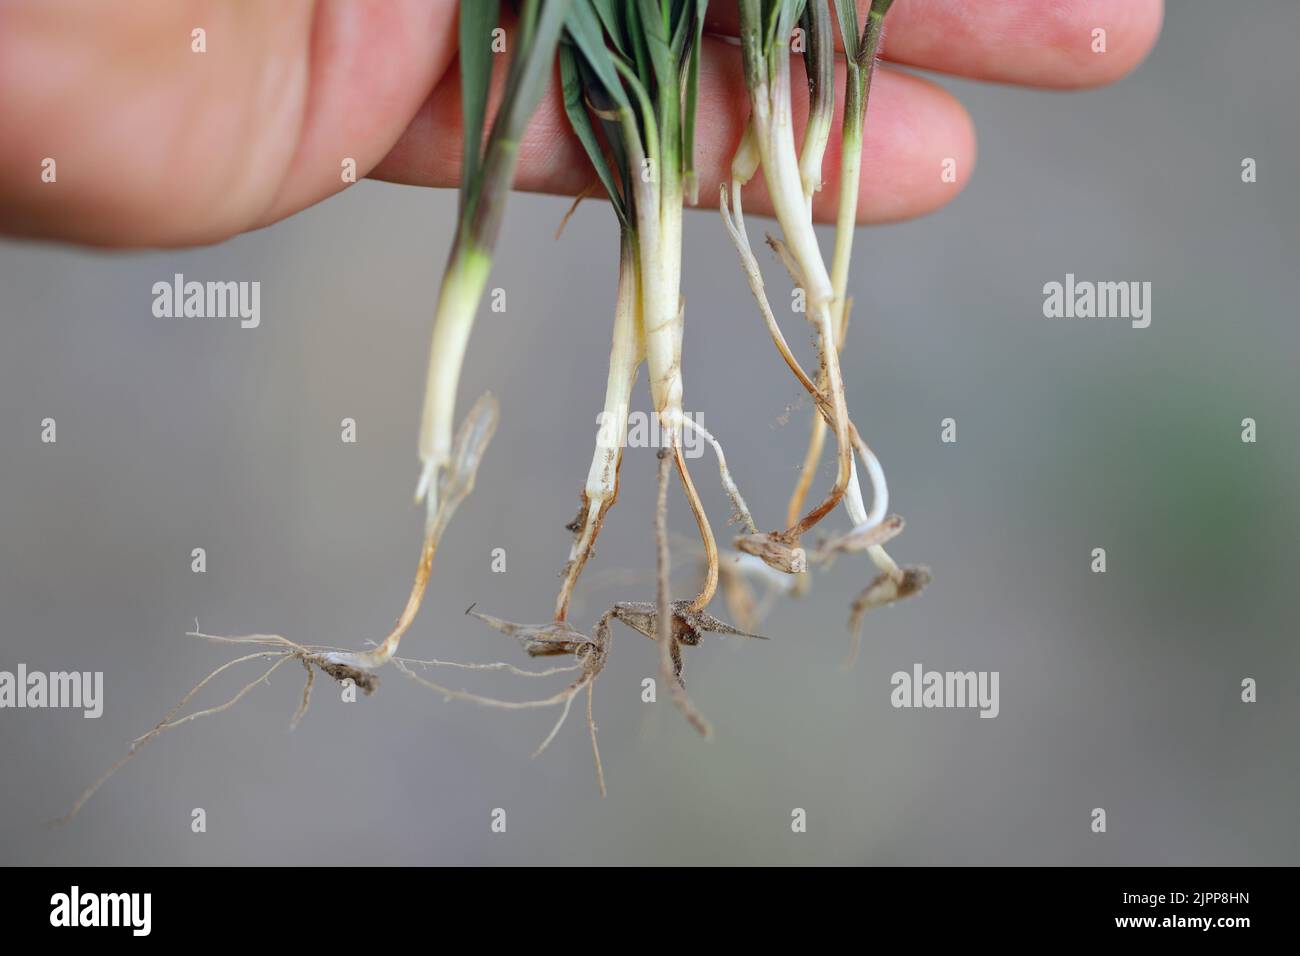 Seedling blight caused by fungi of the genera Fusarium, j Alternaria, Phytophthora and many others. Damage on rye seedlings. Stock Photo